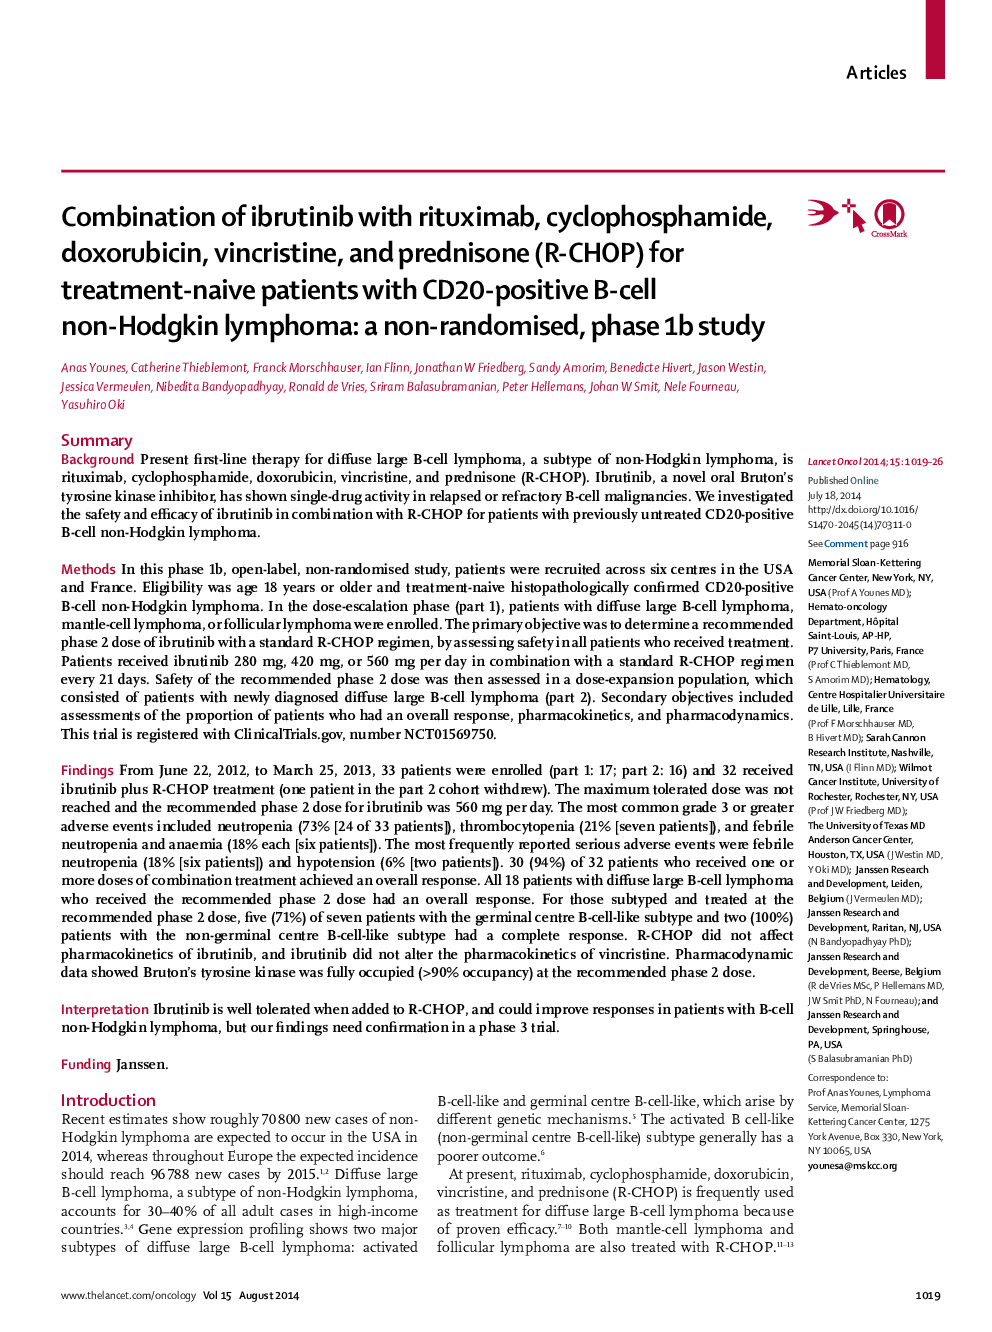 Combination of ibrutinib with rituximab, cyclophosphamide, doxorubicin, vincristine, and prednisone (R-CHOP) for treatment-naive patients with CD20-positive B-cell non-Hodgkin lymphoma: a non-randomised, phase 1b study